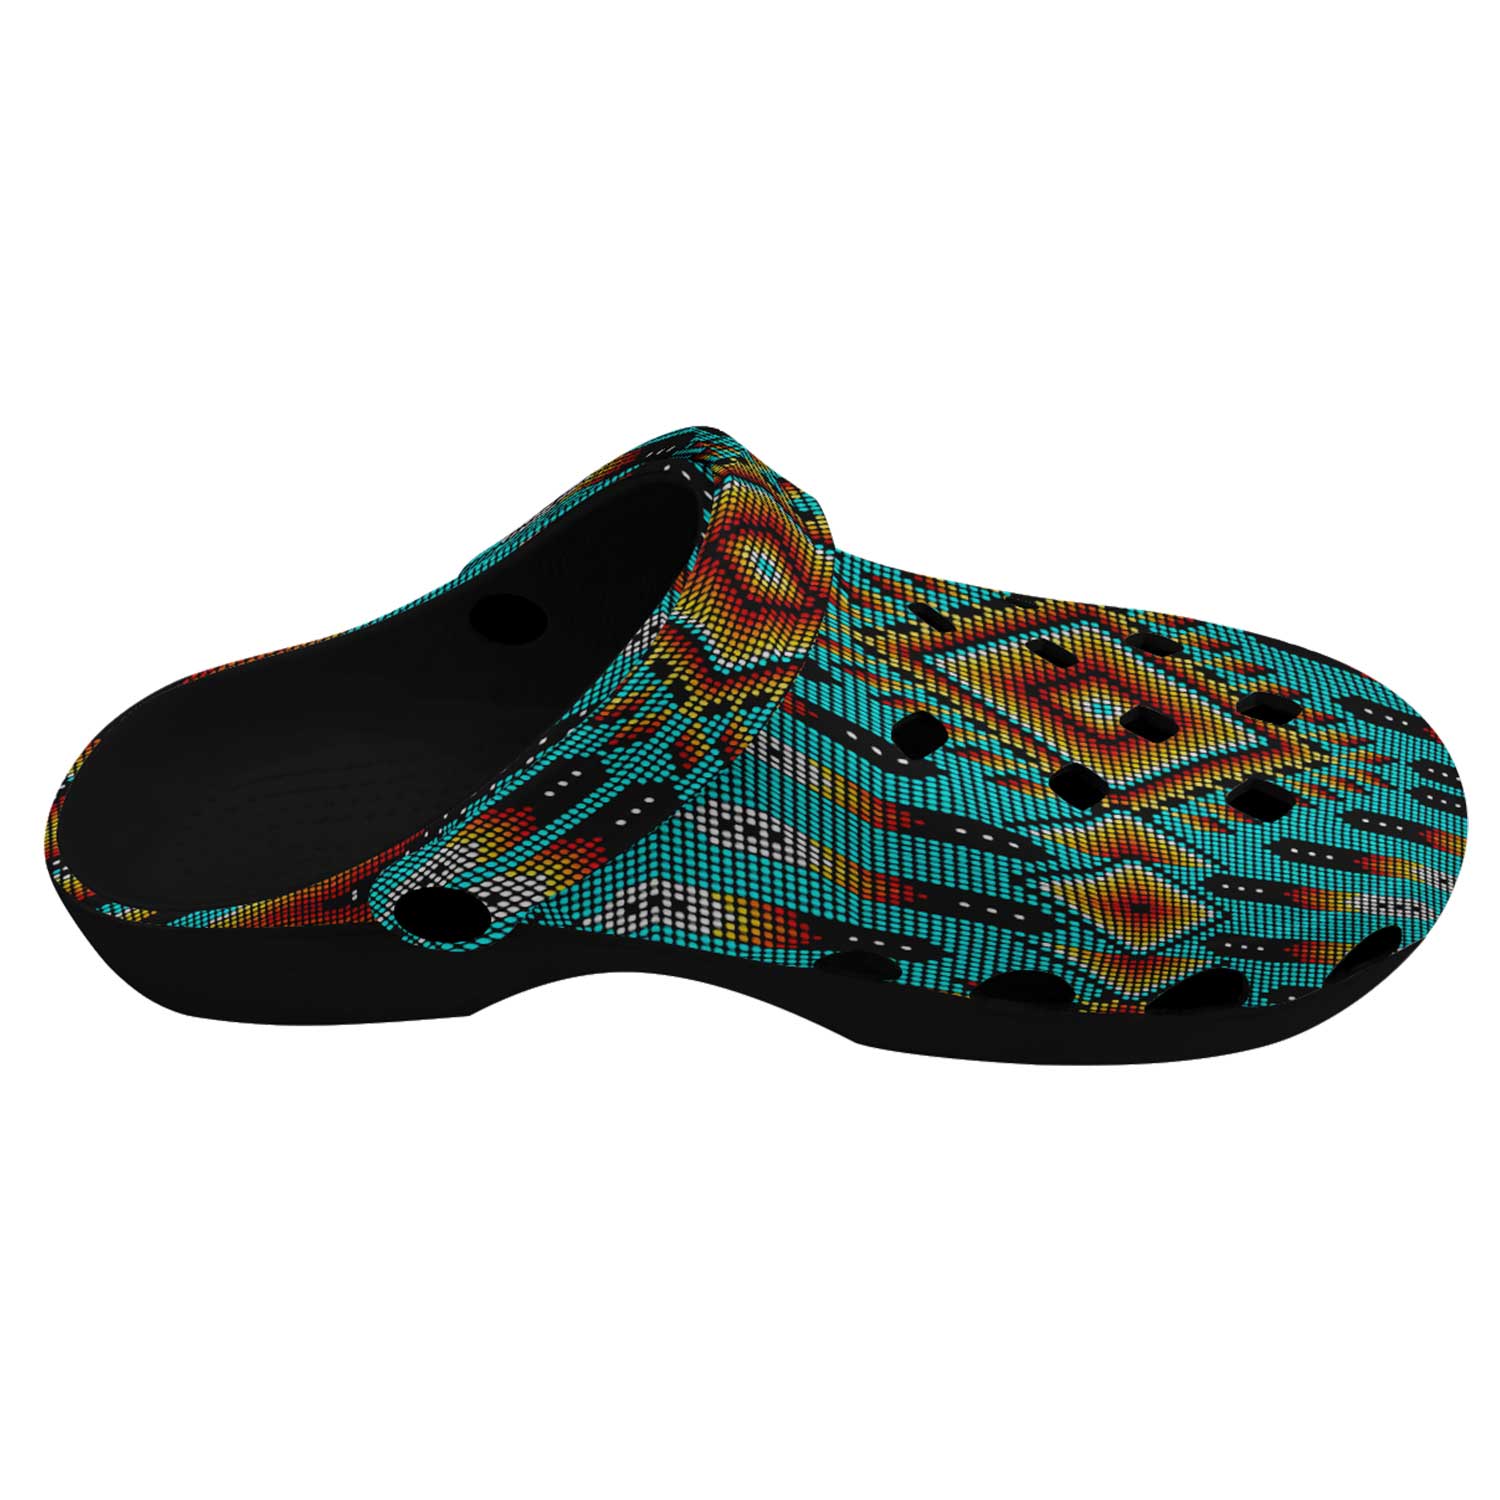 Fire Feather Turquoise Muddies Unisex Clog Shoes